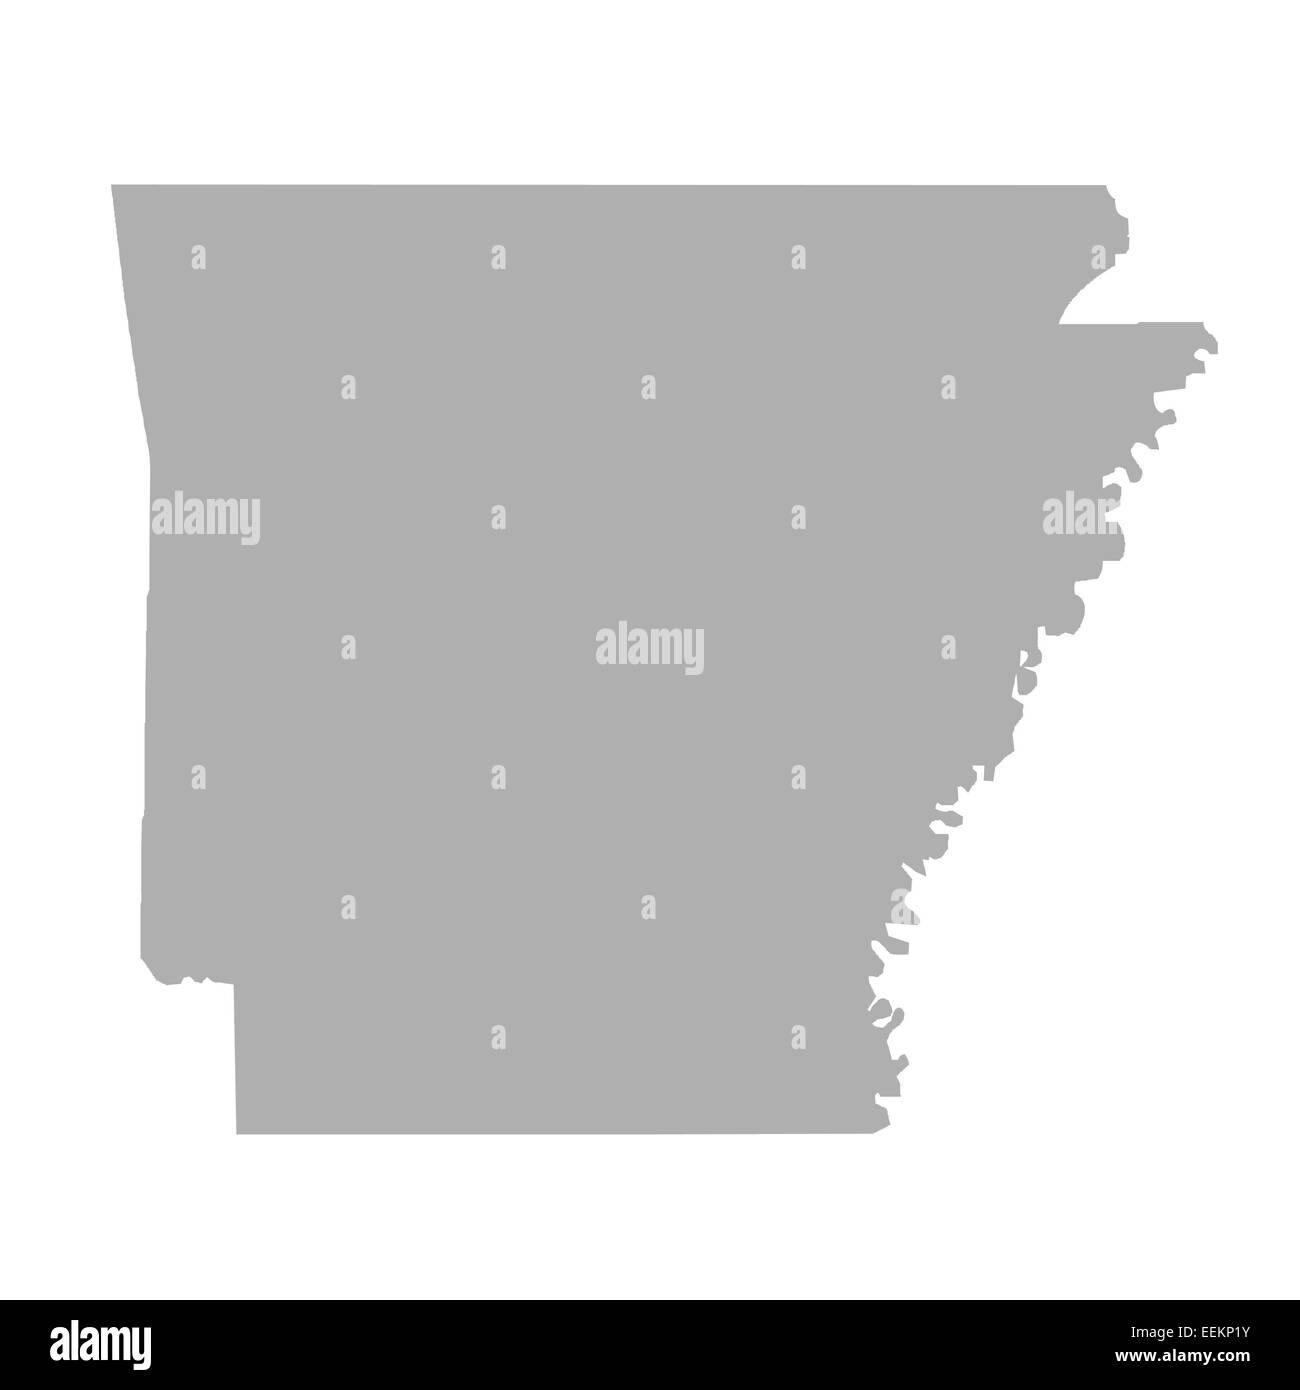 Arkansas State map isolated on a white background, U.S.A. Stock Photo